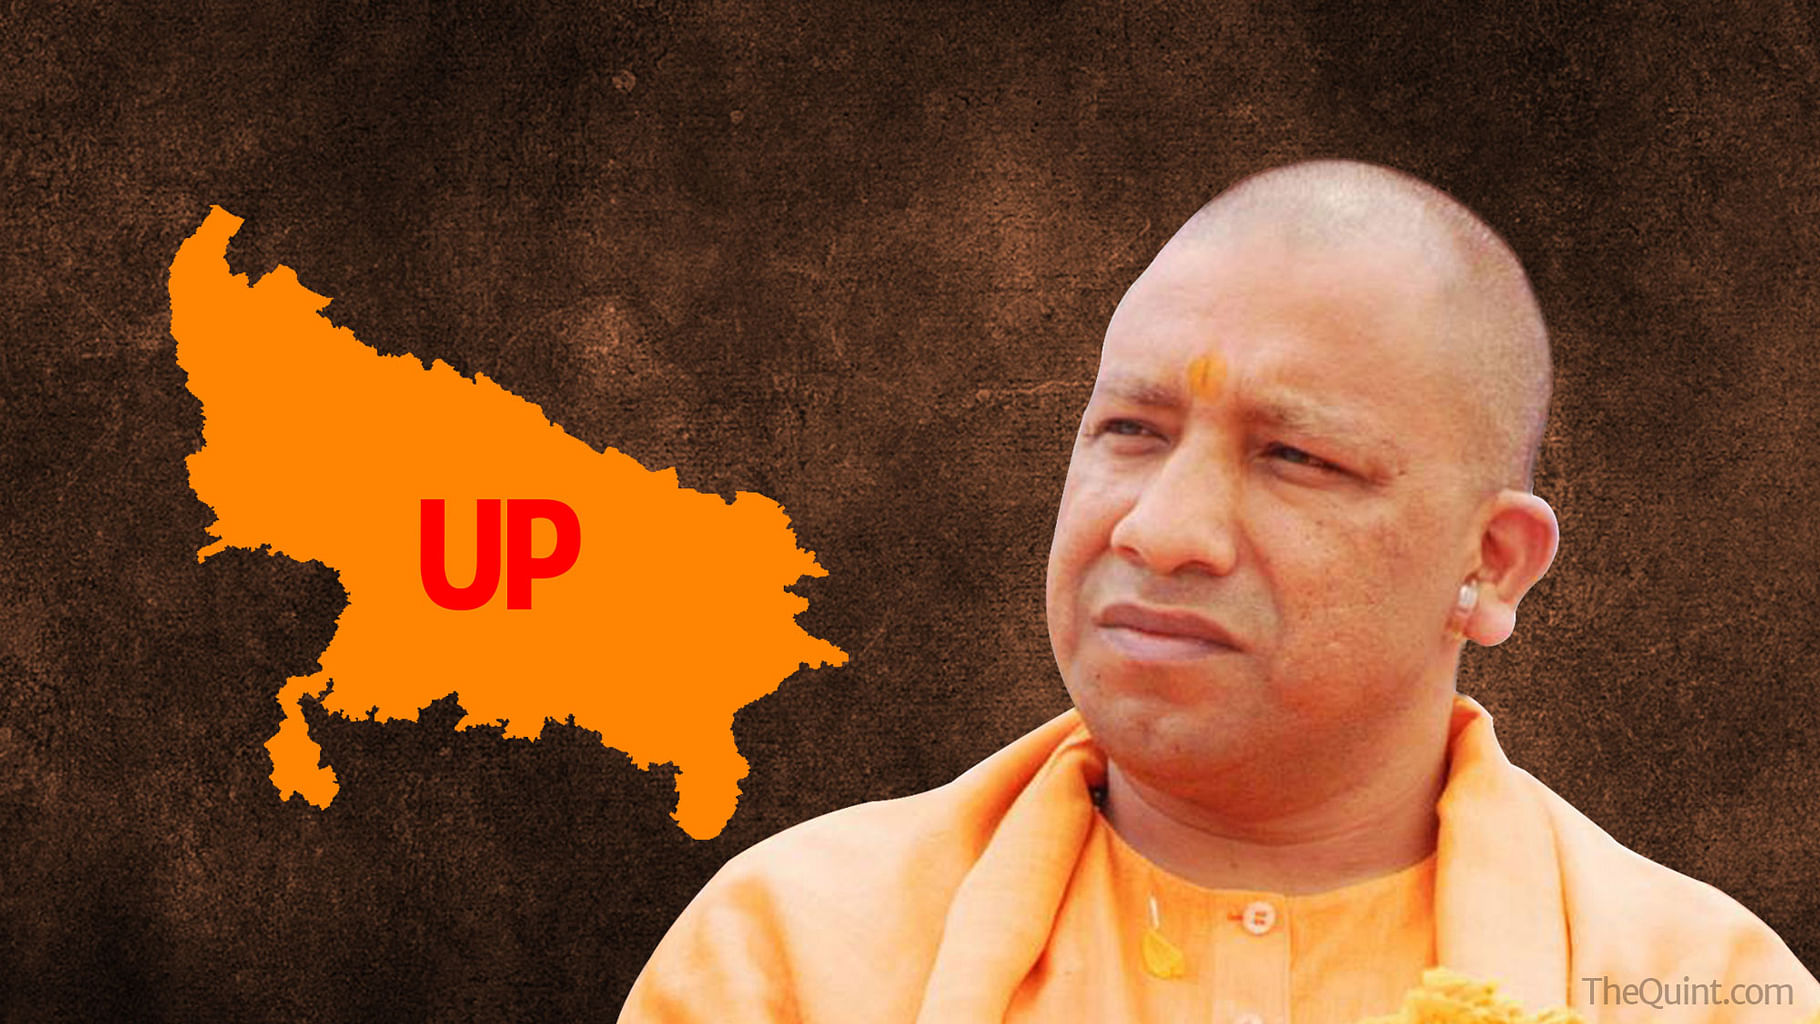 There is no doubt that the proposed candidature of the Gorakhpur MP – who makes no bones about his communal leanings – is an out-of-the-box idea. (Photo: <b>The Quint</b>)